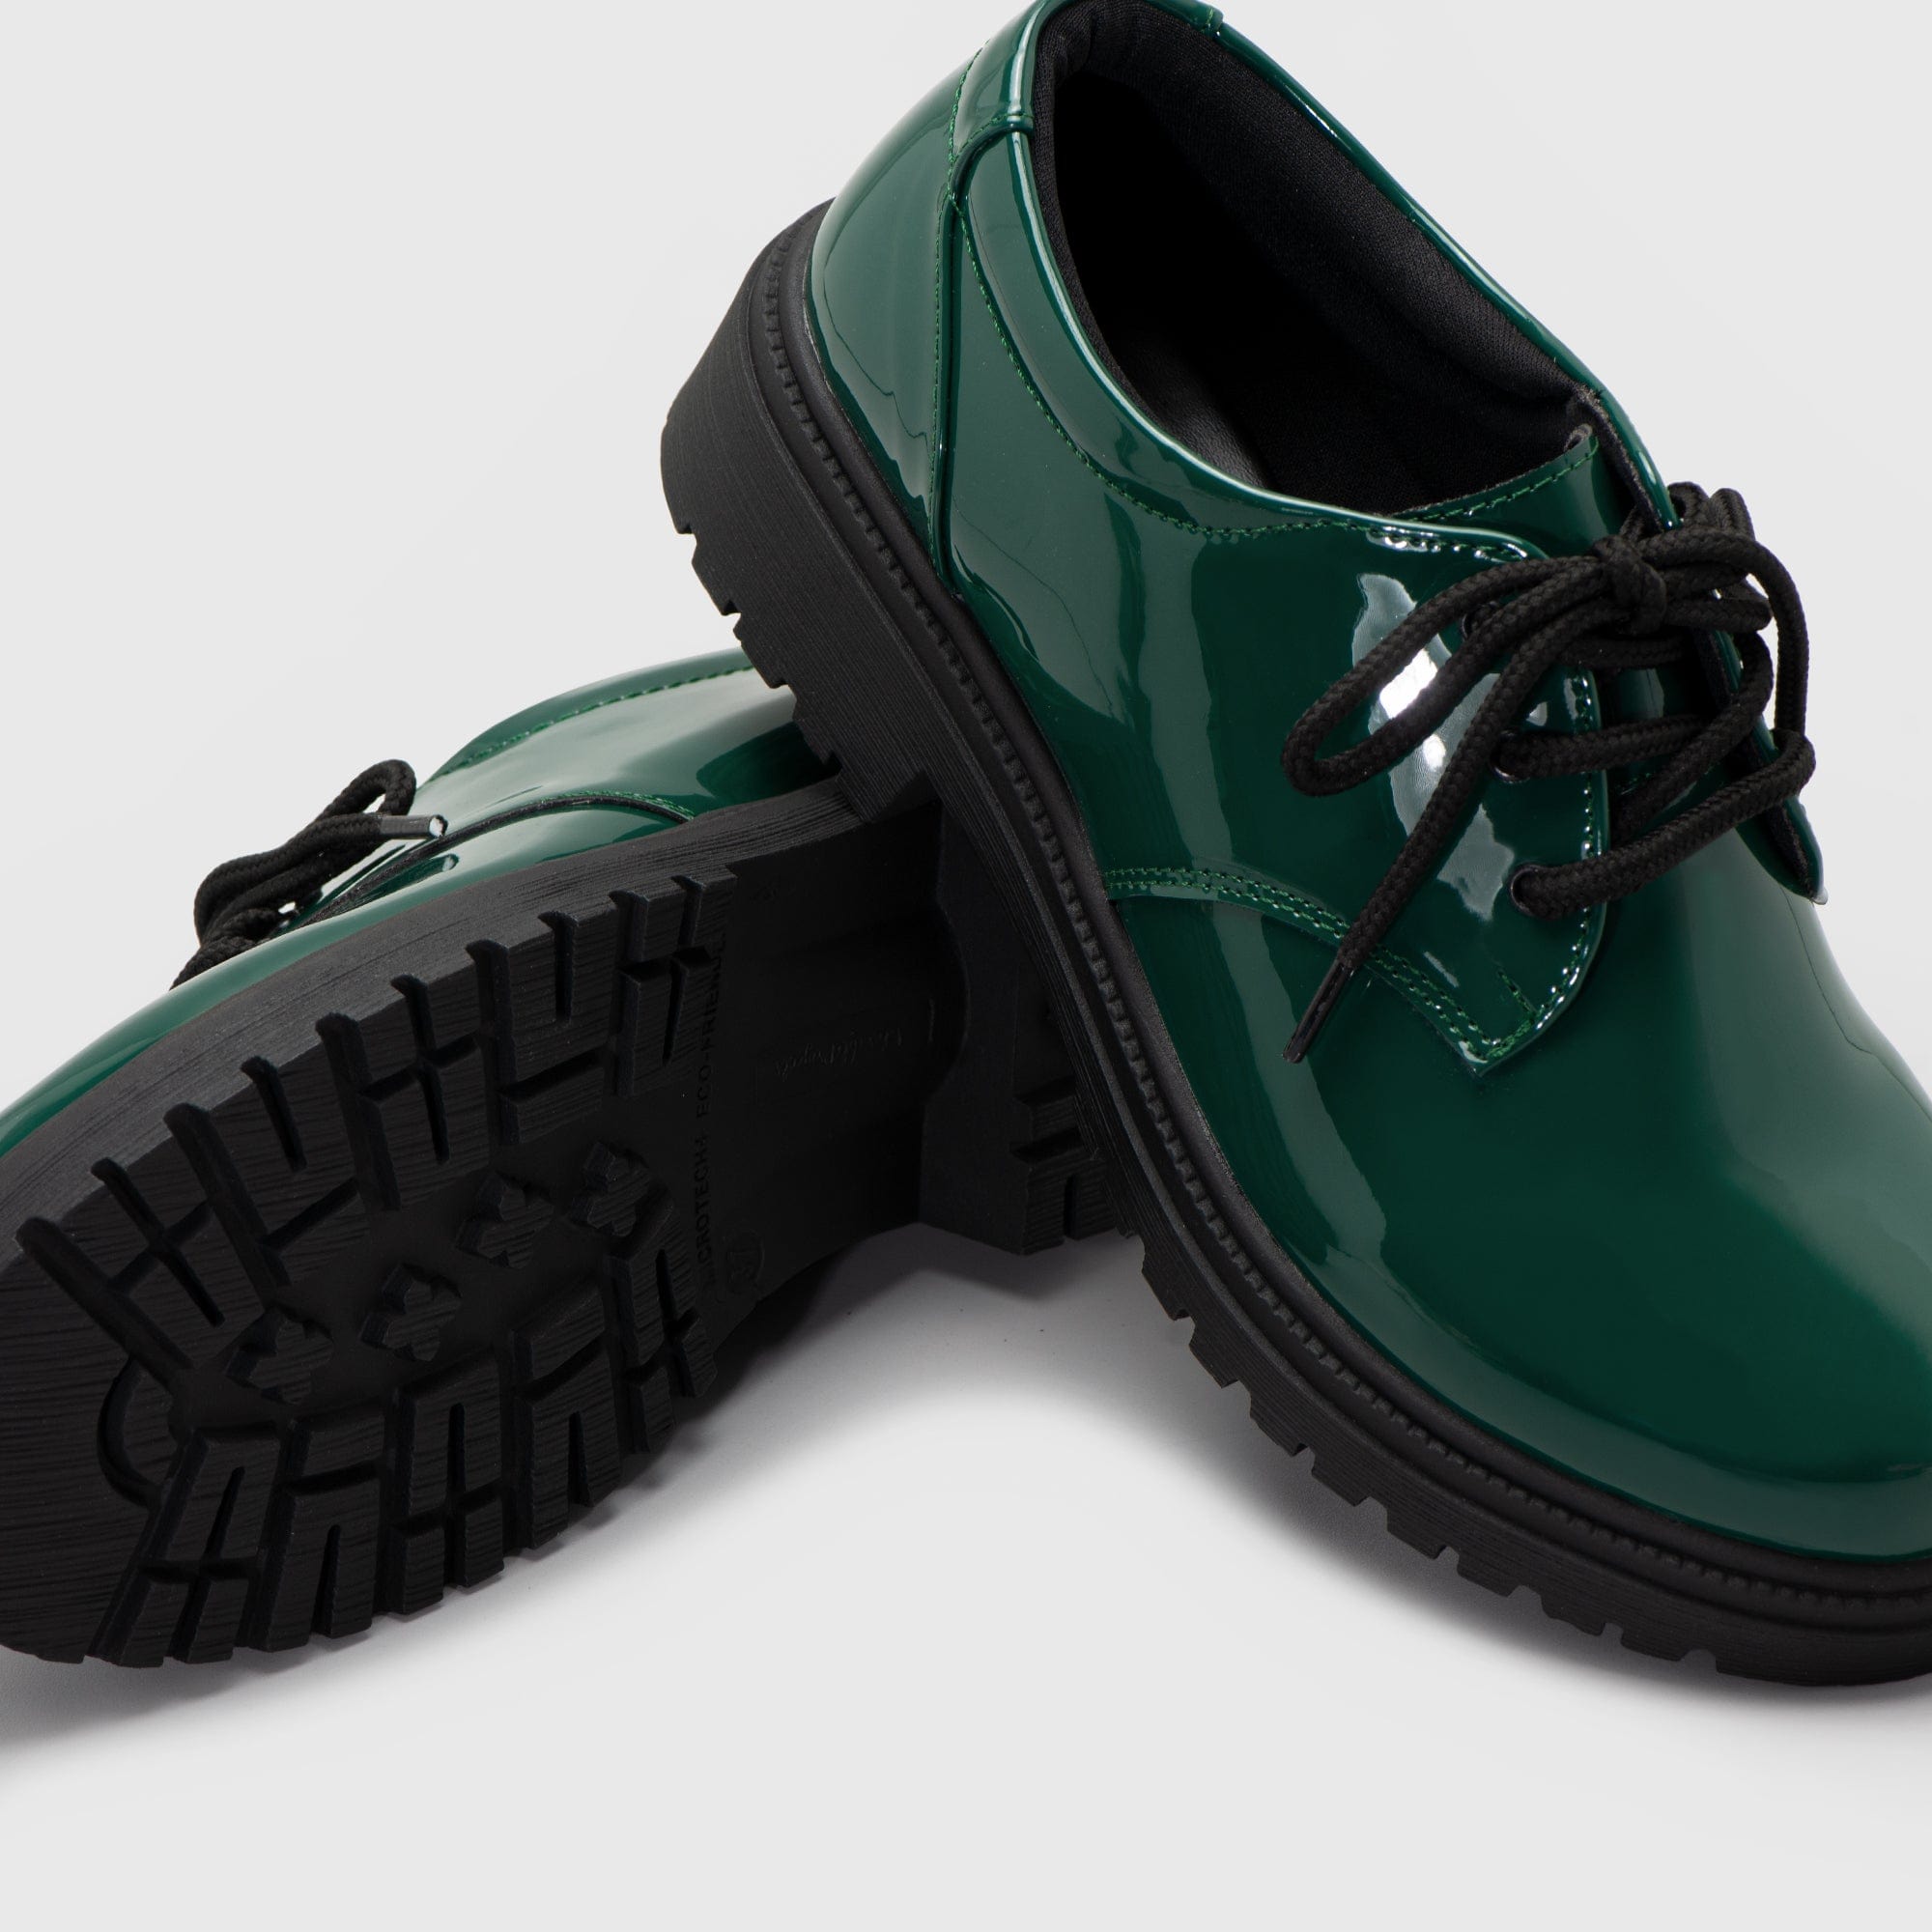 Adorable Projects Official Adorableprojects - Vailey Oxford Green - Derby Shoes